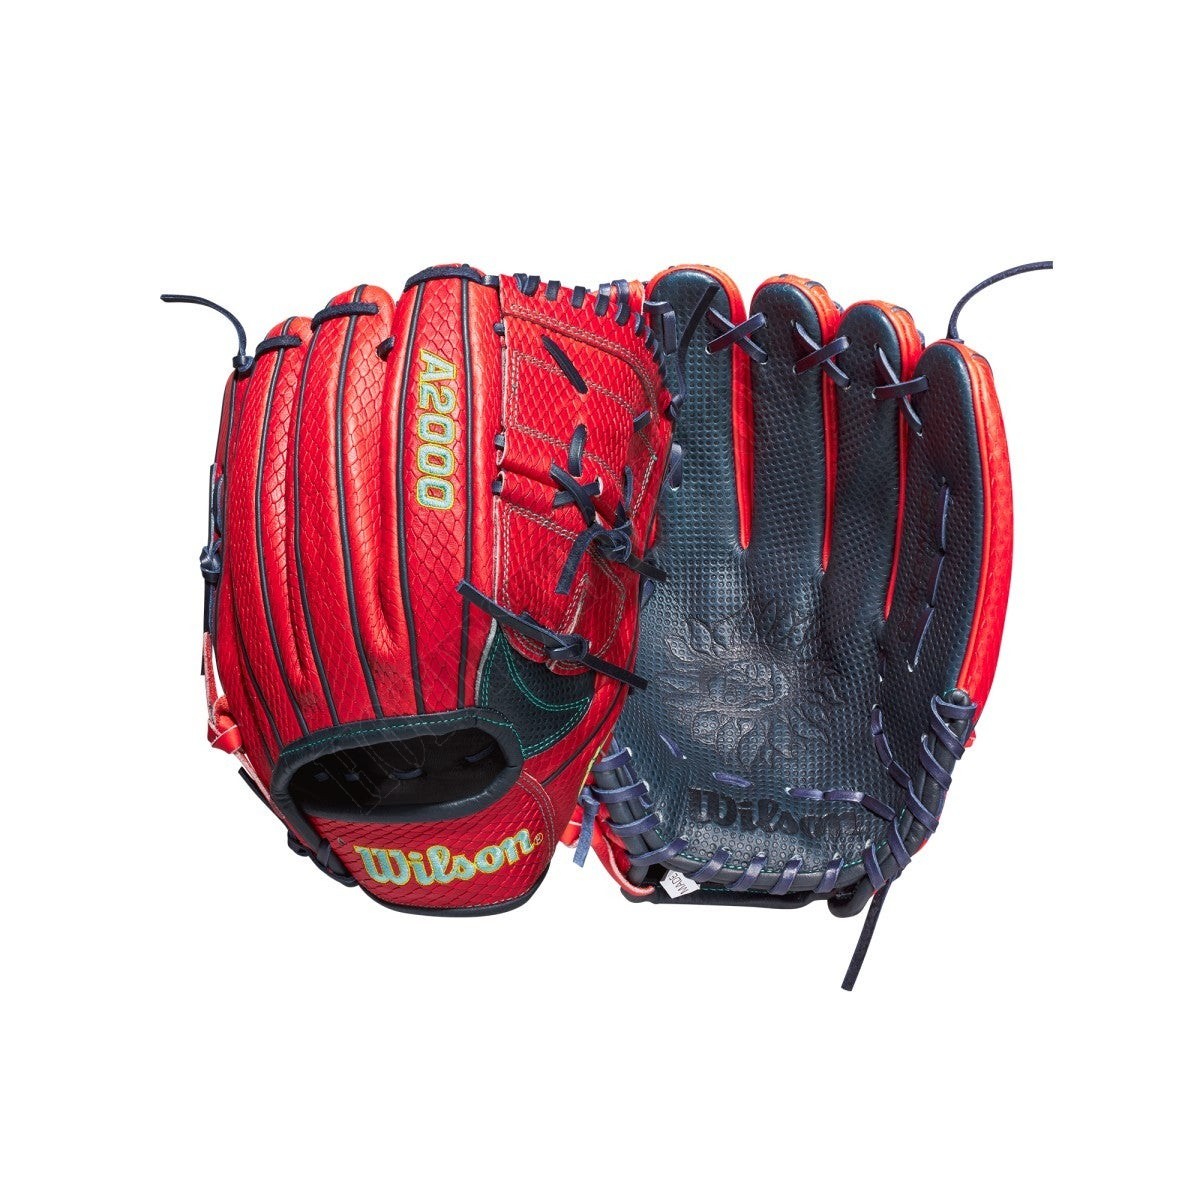 2021 A2000 B2 12" Mike Clevinger Game Model Pitcher's Baseball Glove ● Wilson Promotions - -0